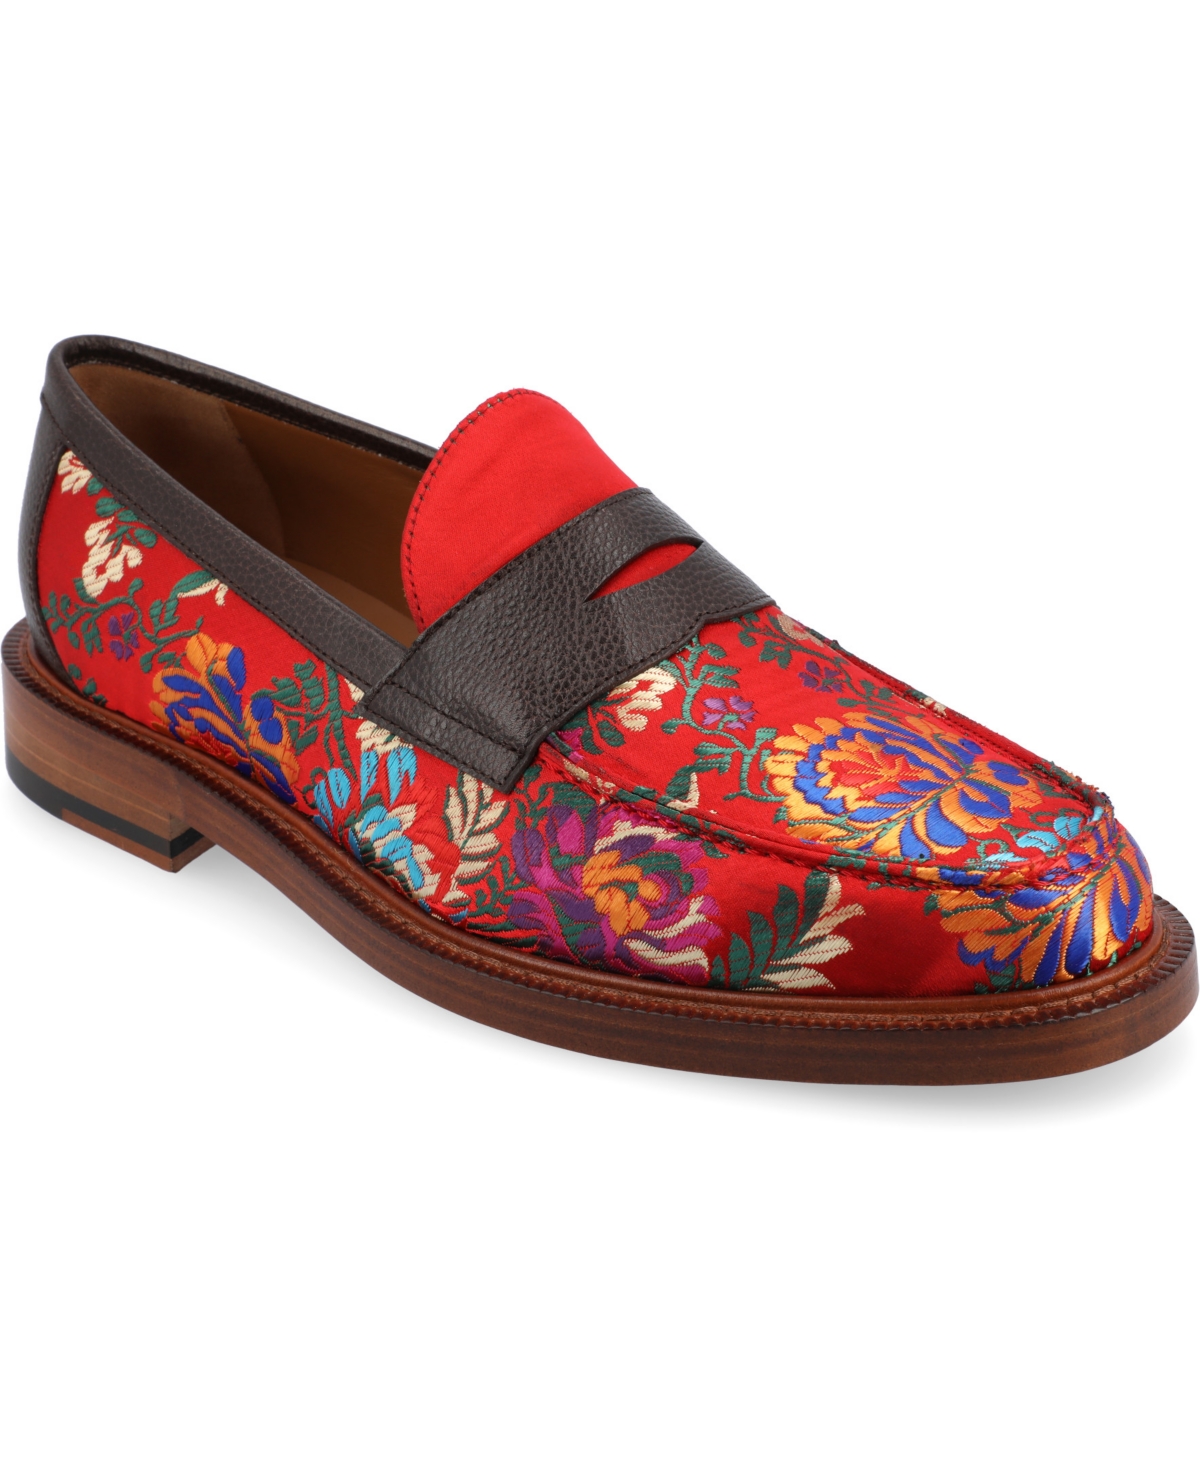 Men's The Fitz Loafer - Fiore